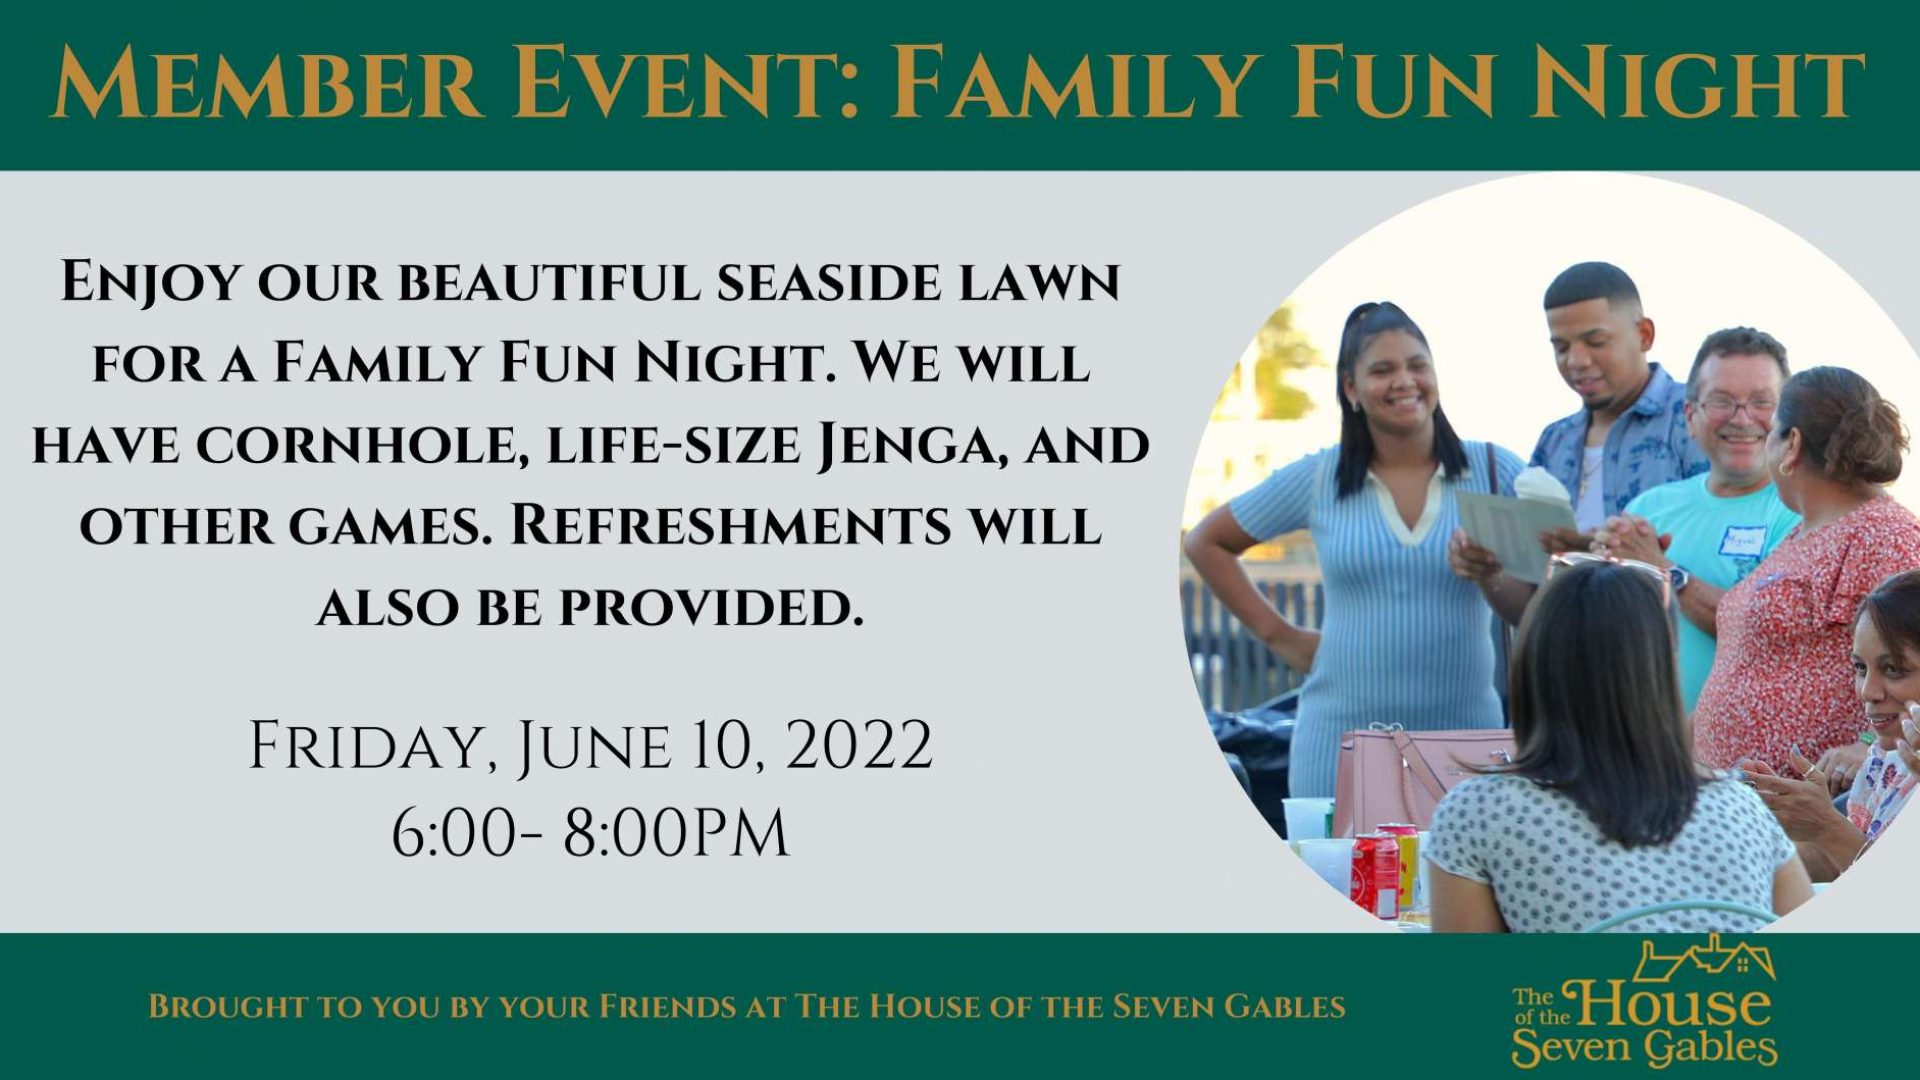 Member Event: Family Fun Night. Enjoy our beautiful seaside lawn for a Family Fun Night. We will have cornhole